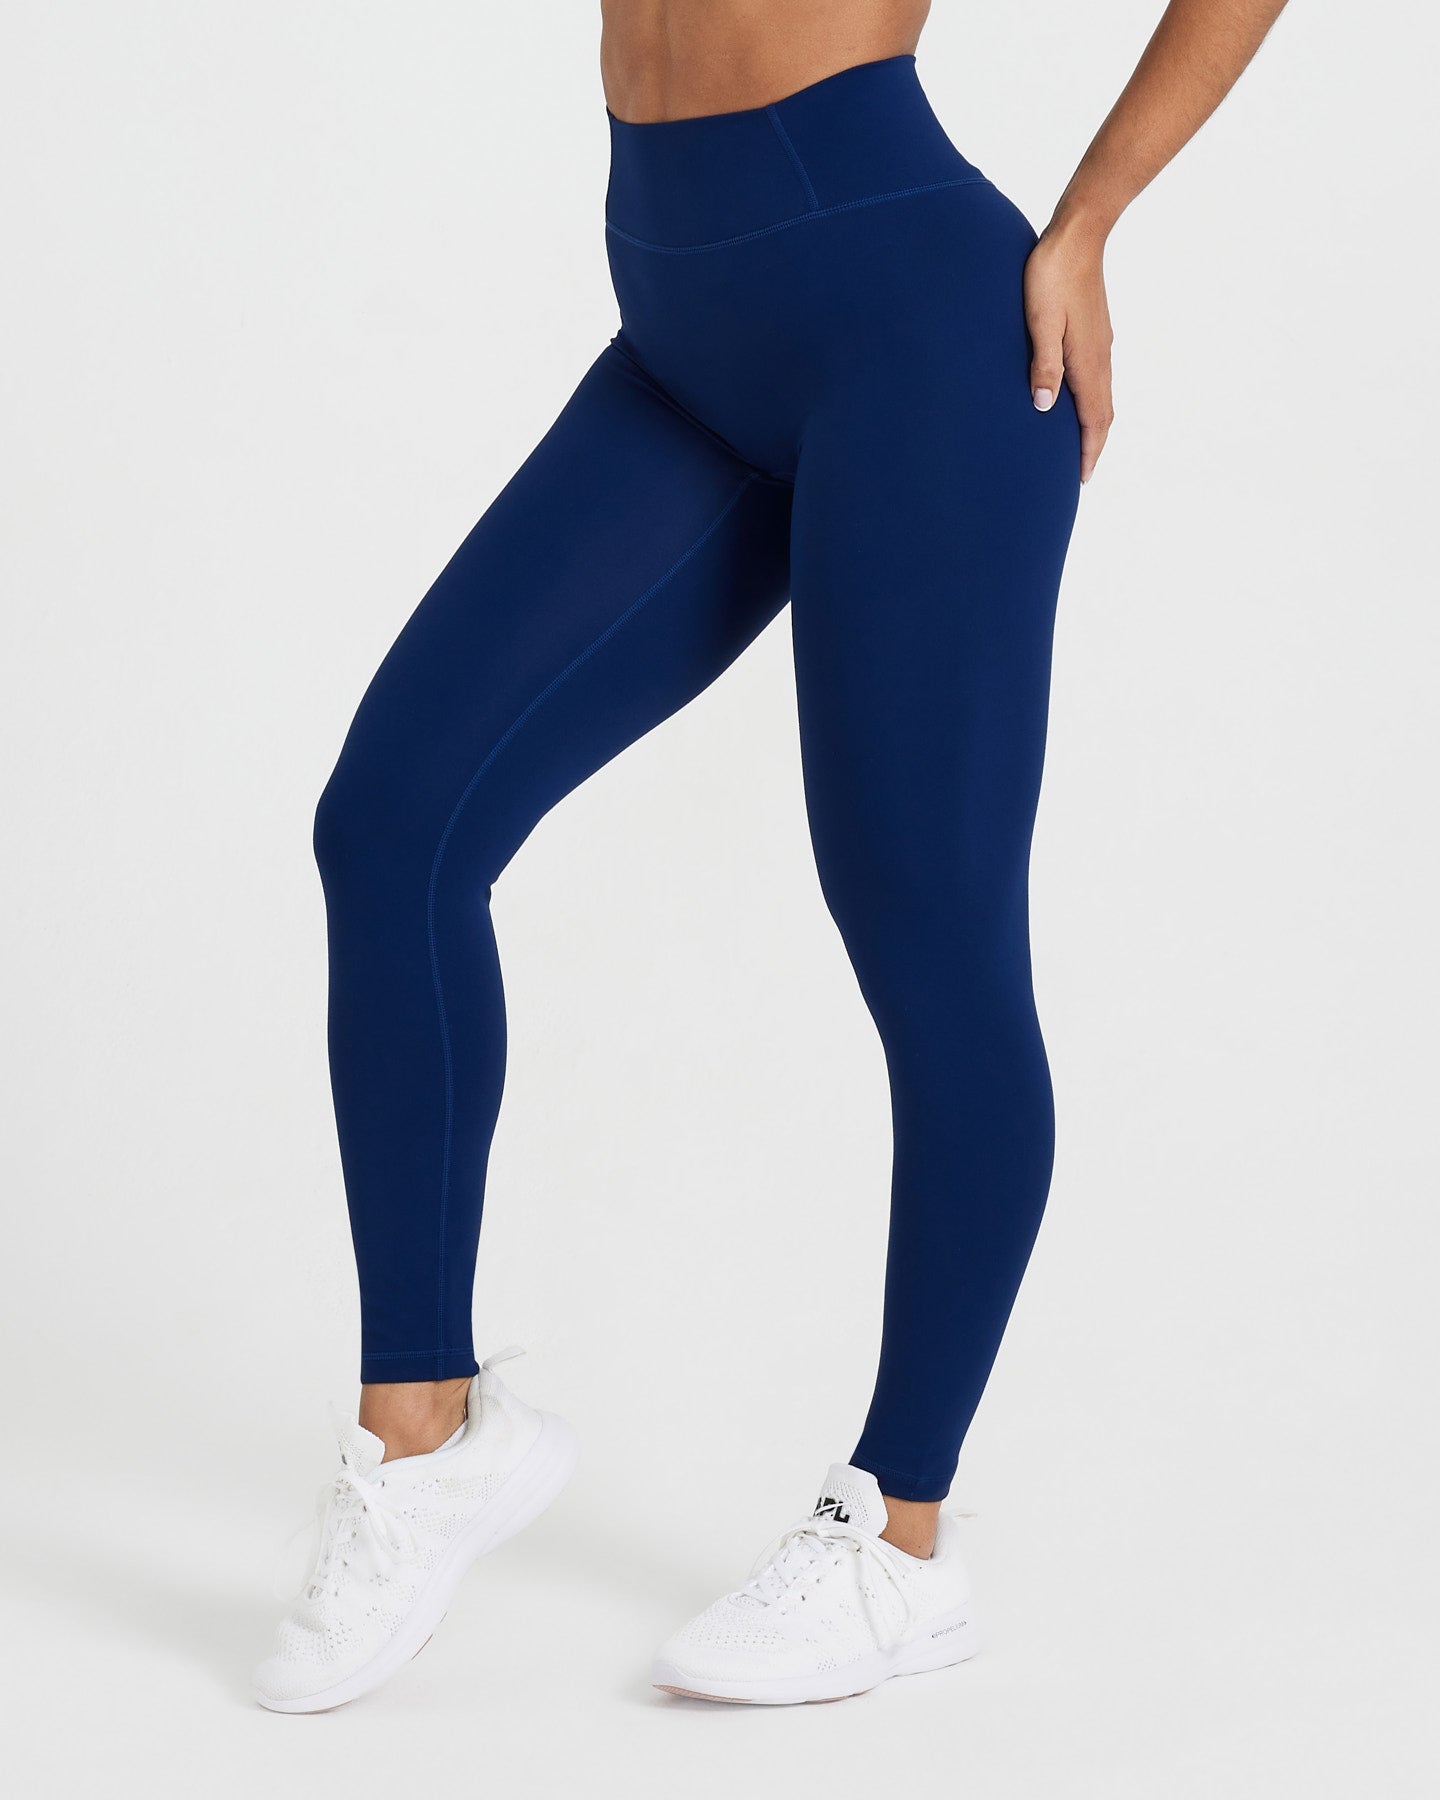 Women's Leggings with ultimate Glute Separation | Oner Active US